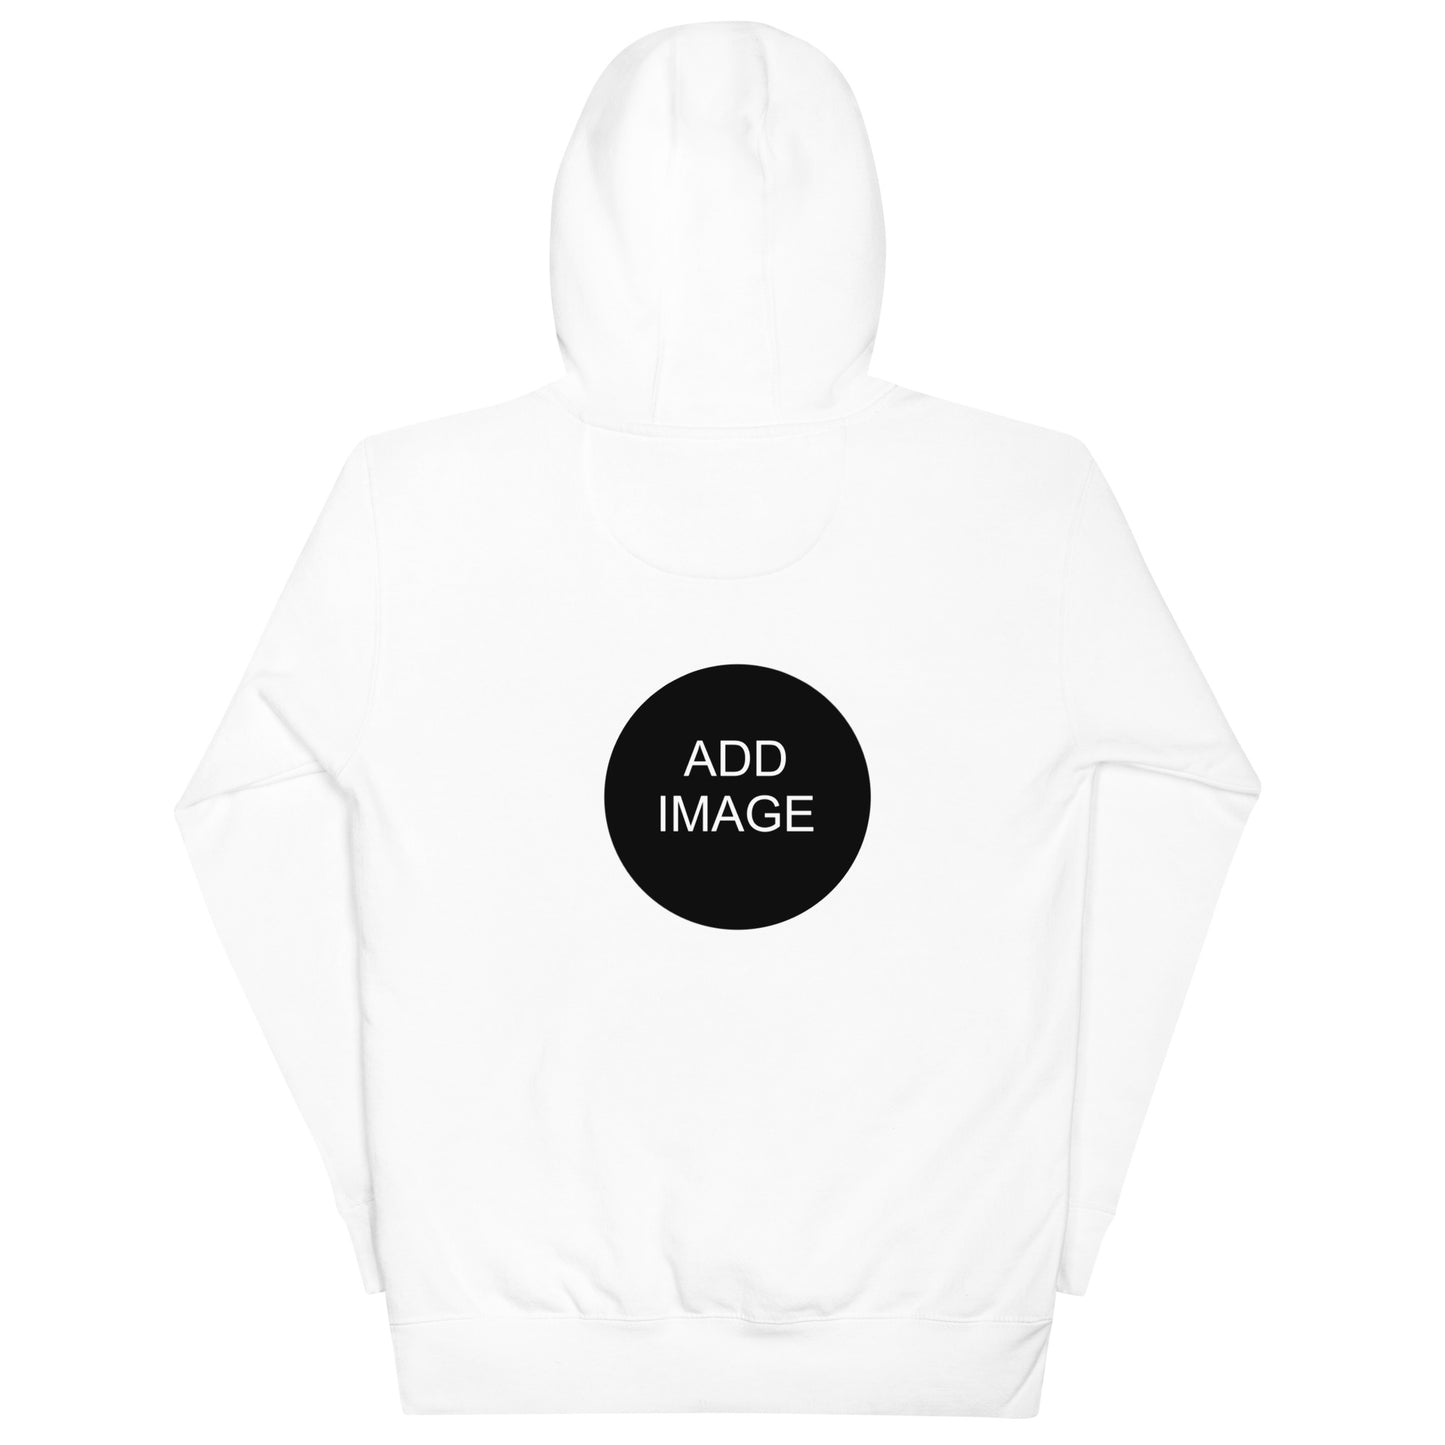 Customizable Hoodie - Front and Back - Image and Text - Unisex